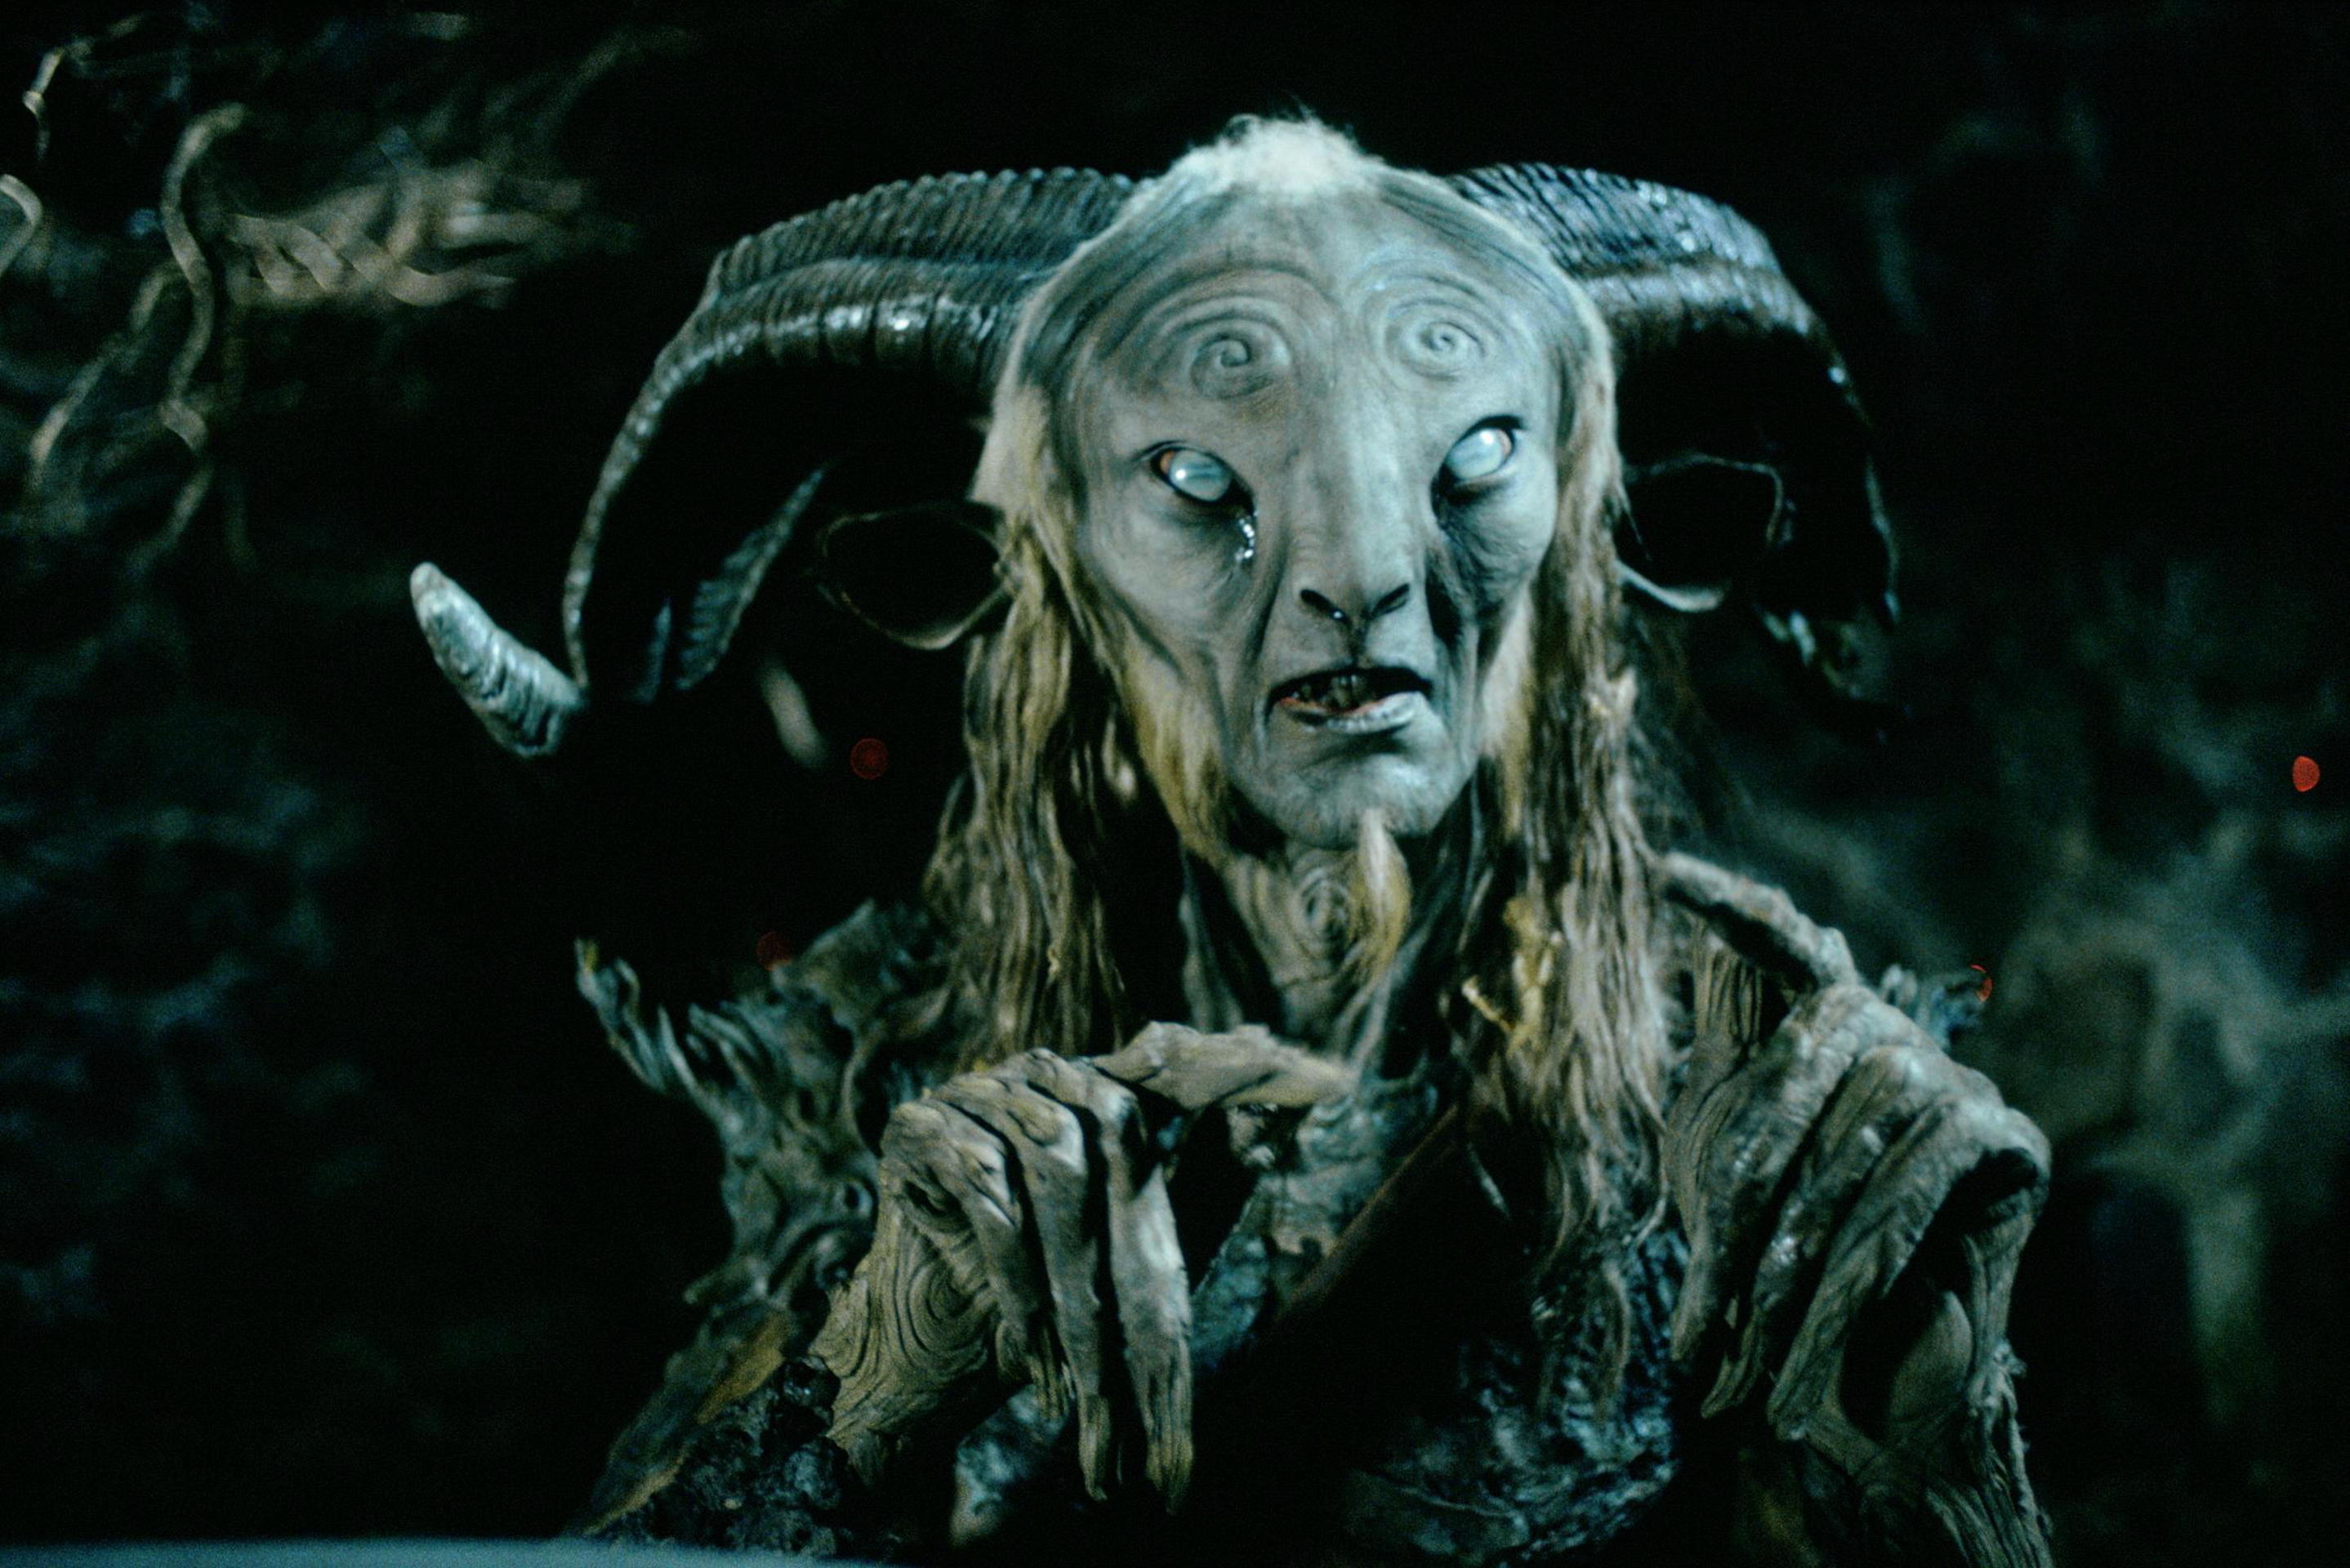 Pan's Labyrinth, Fan art on walls, Personal artistic expression, Movie-inspired drawings, 2880x1920 HD Desktop